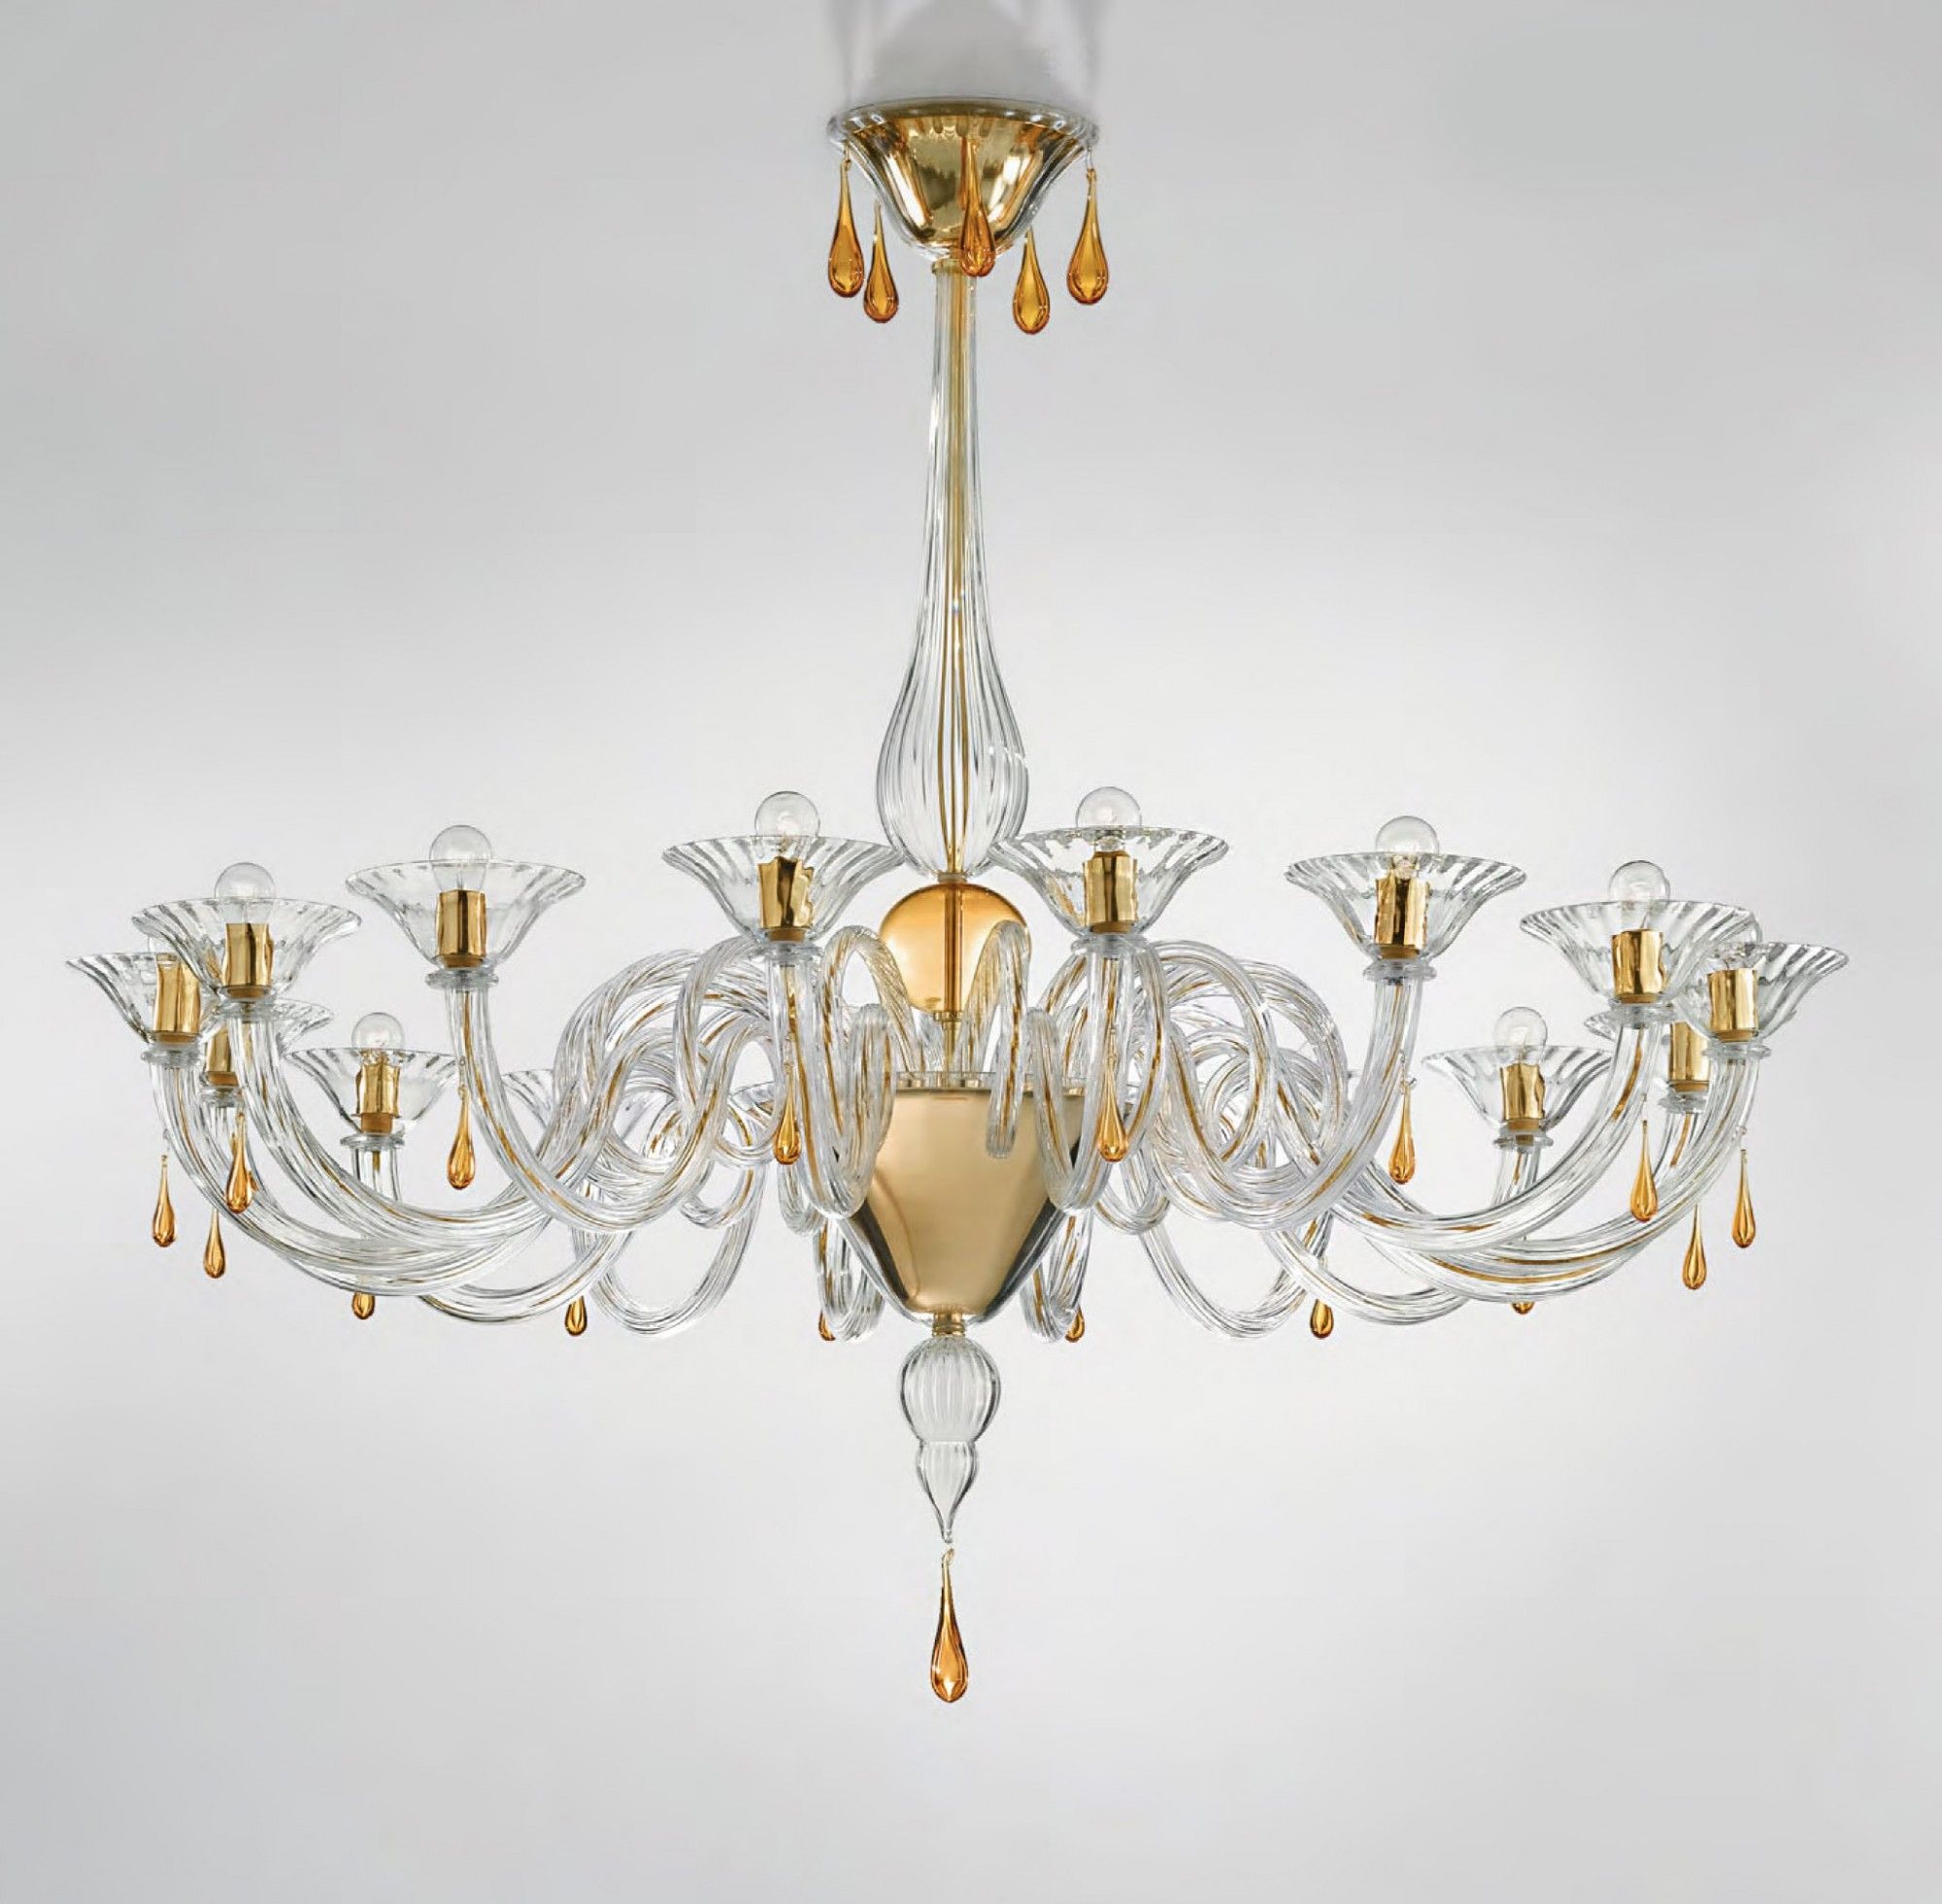 Modern Glass Chandeliers Uk For Modern Glass Chandeliers (View 6 of 12)